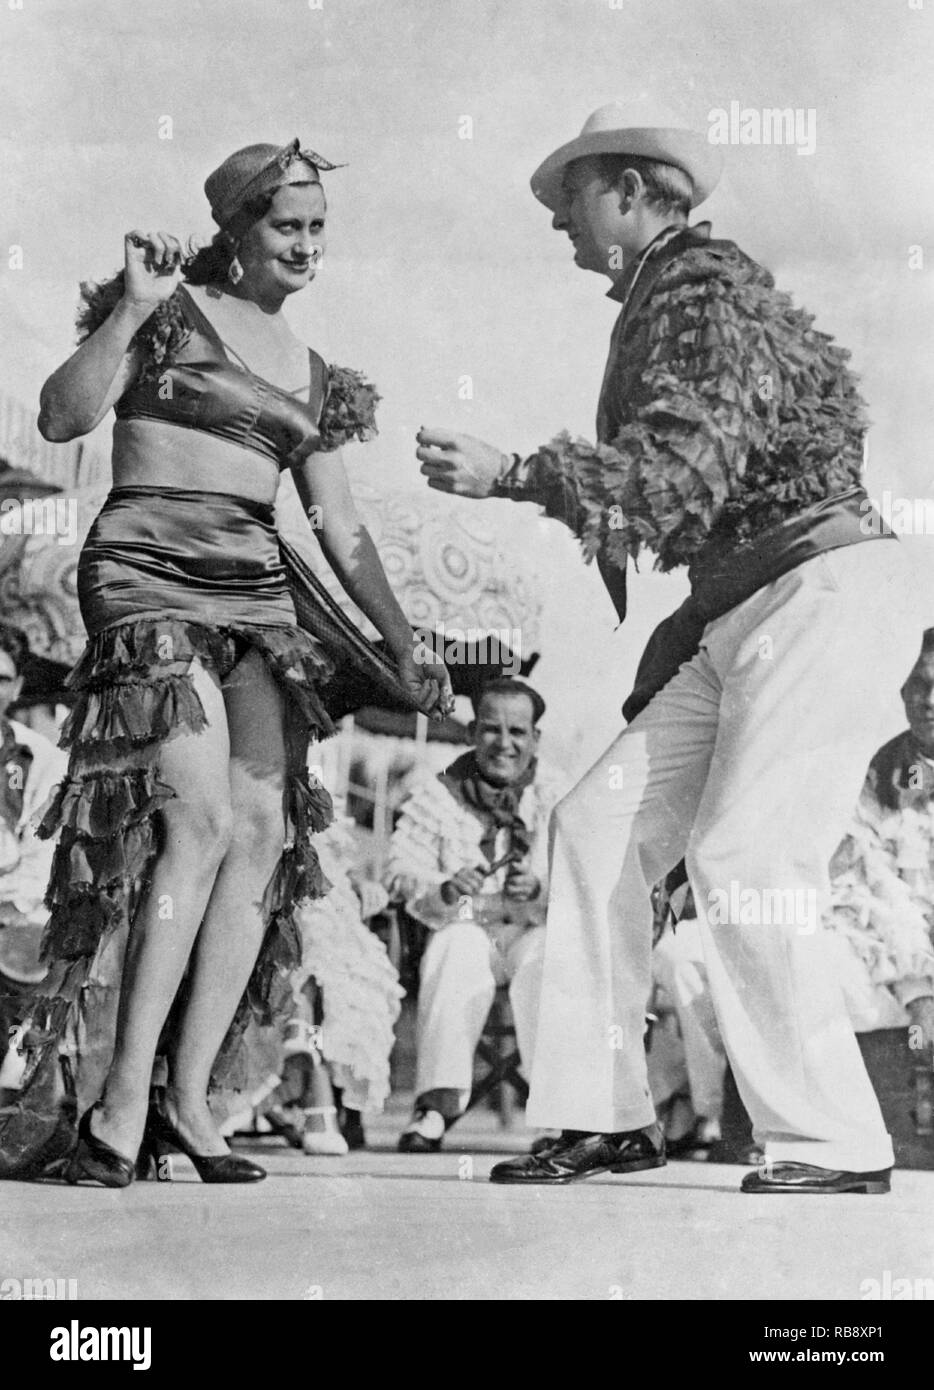 Dancing in the 1930s. A couple dancing rumba in the 1930s. Stock Photo